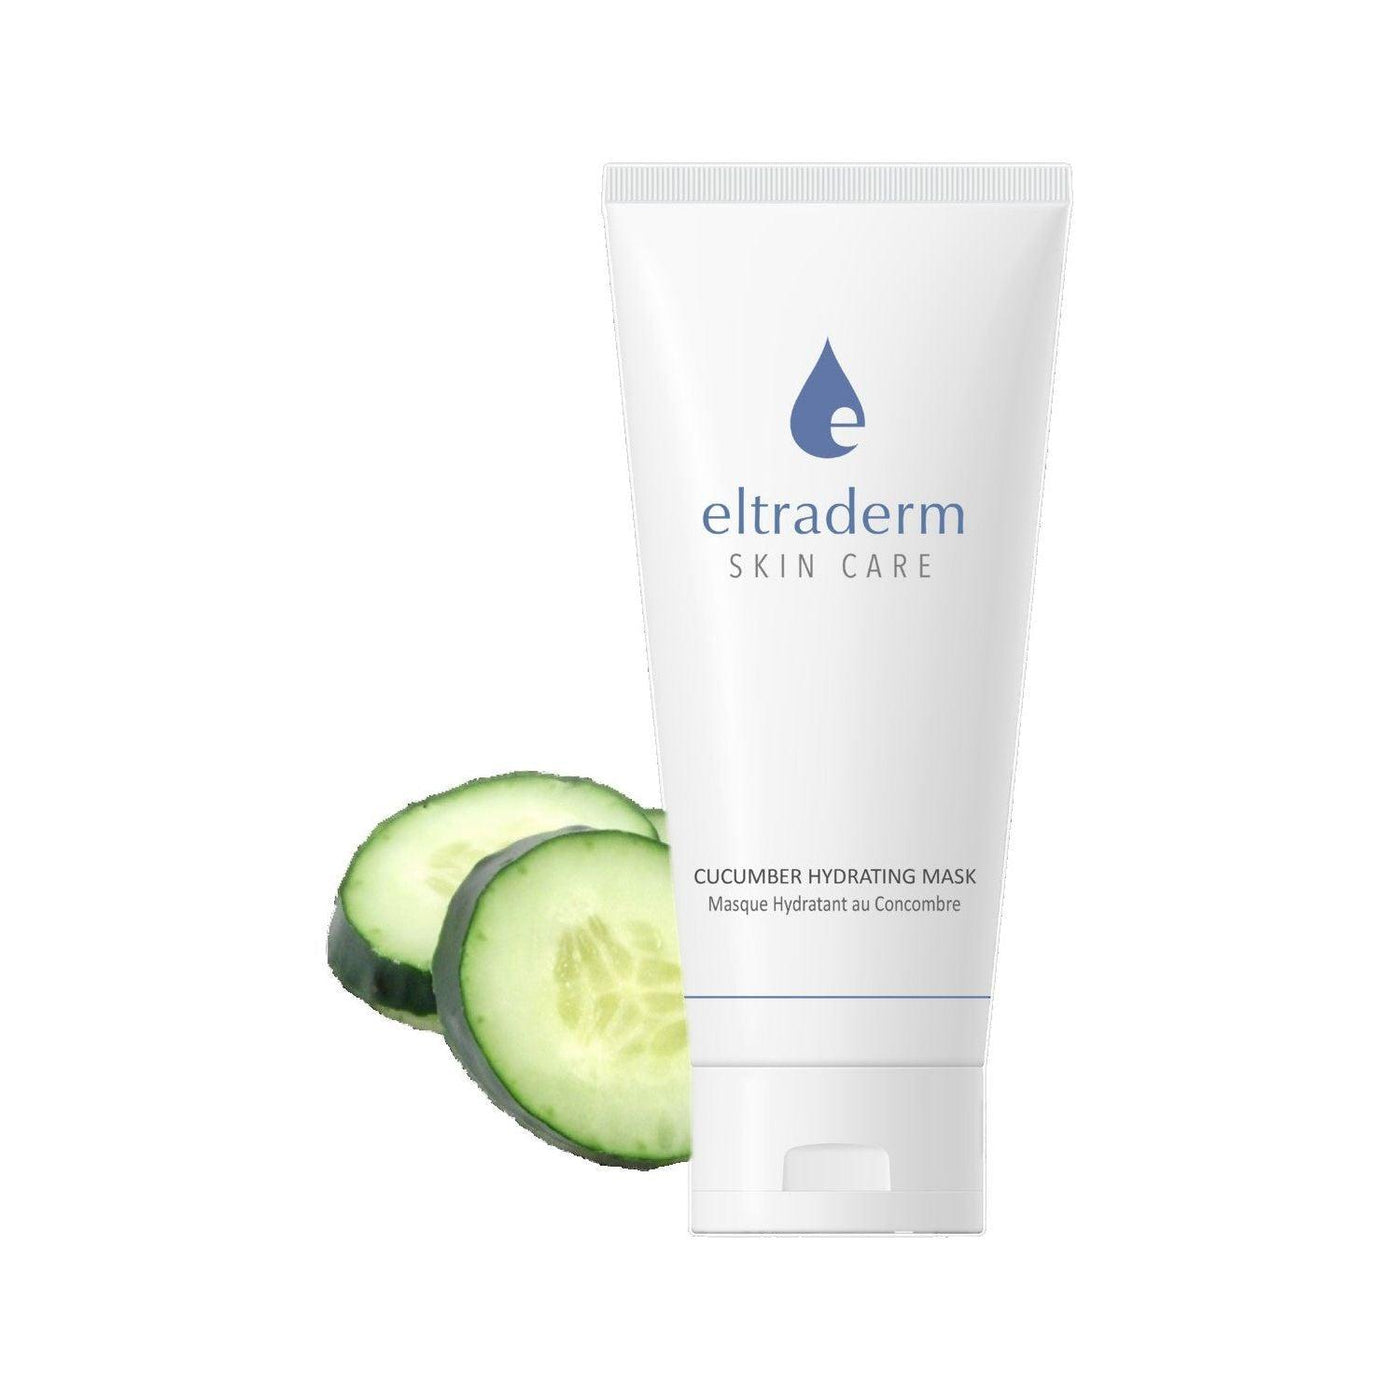 CUCUMBER HYDRATING MASK Eltraderm Boutique Deauville